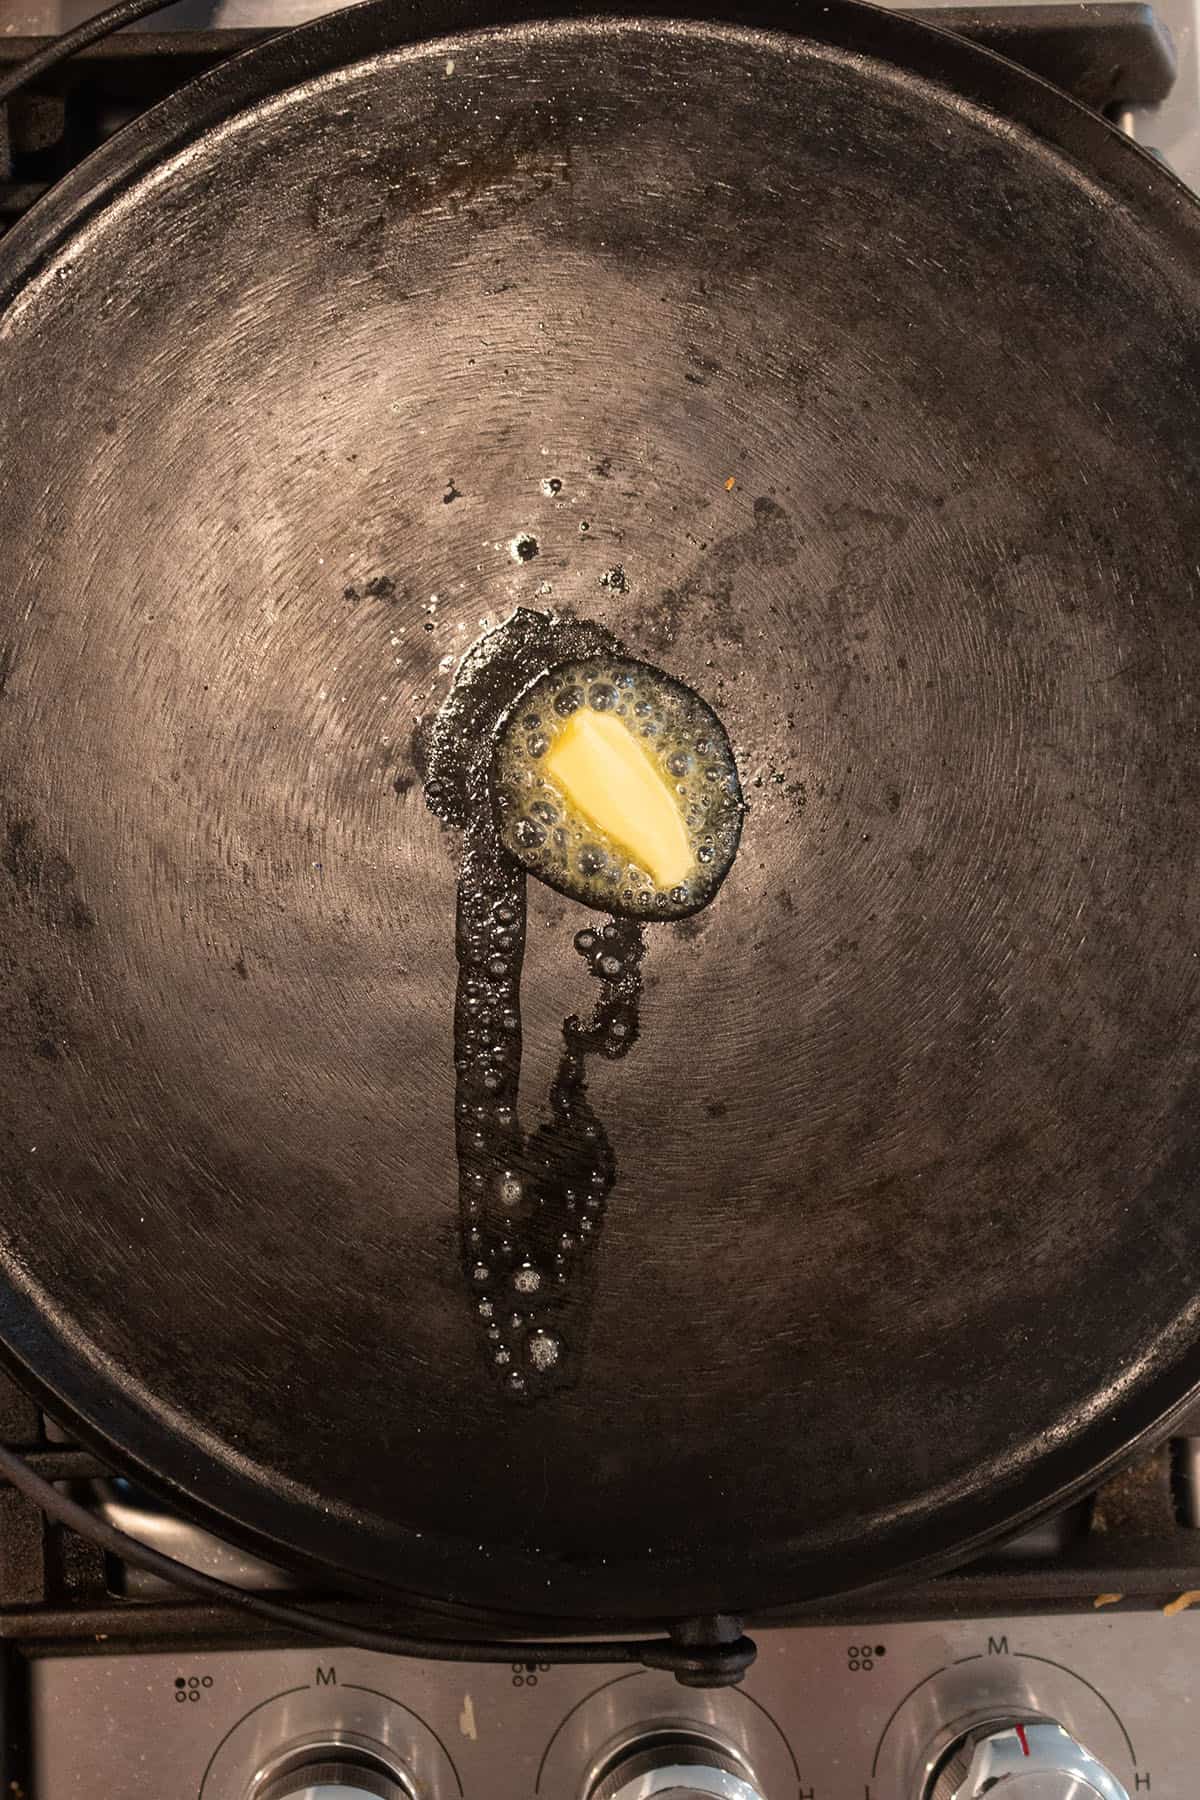 Butter being melted on a cast iron griddle.